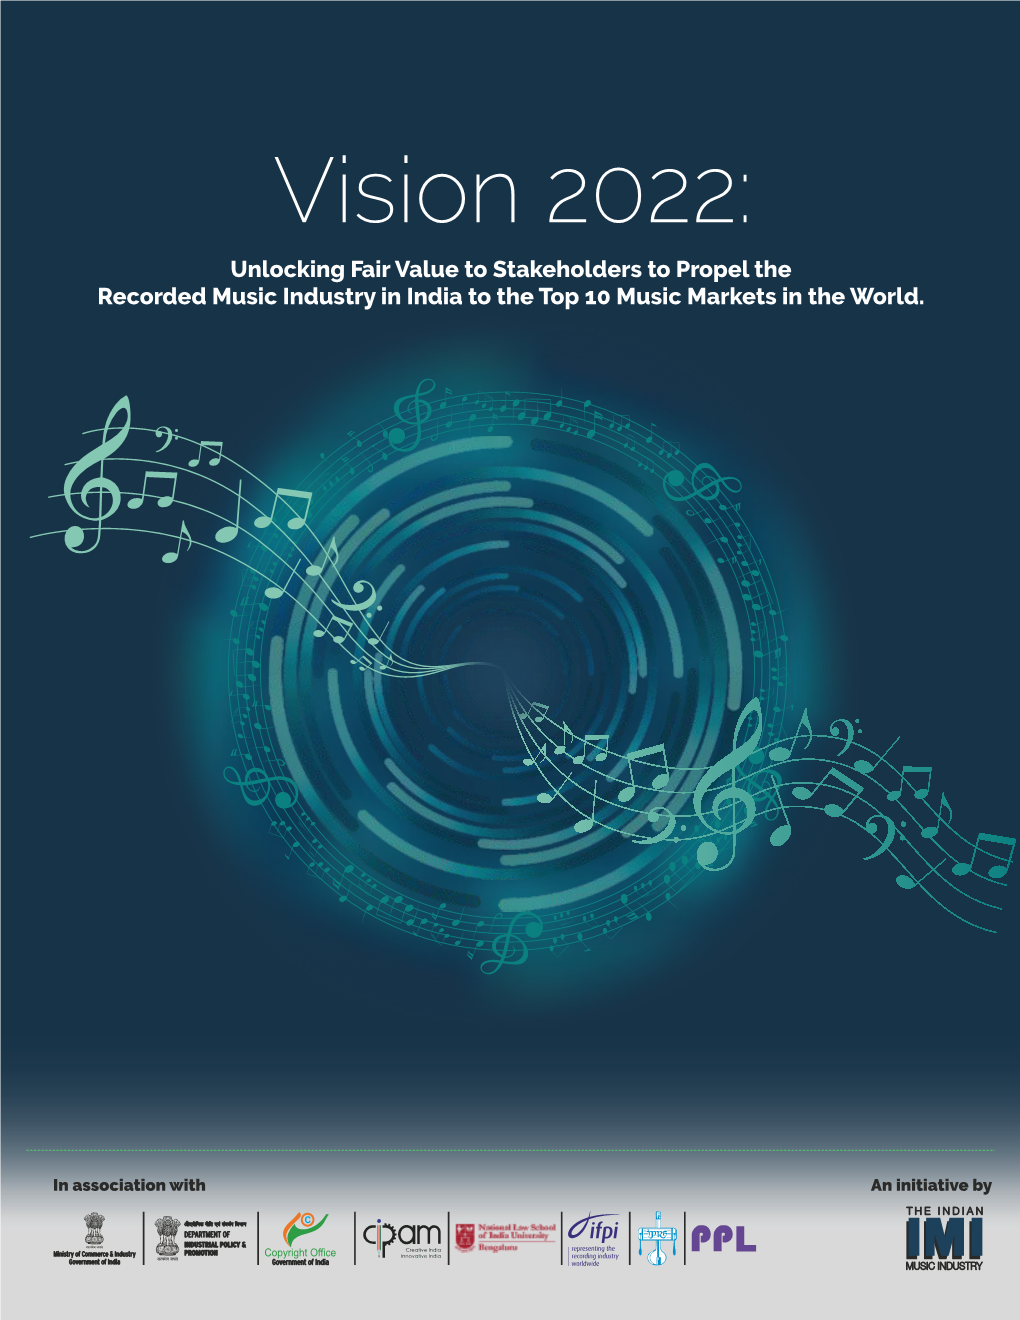 Vision 2022: Unlocking Fair Value to Stakeholders to Propel the Recorded Music Industry in India to the Top 10 Music Markets in the World